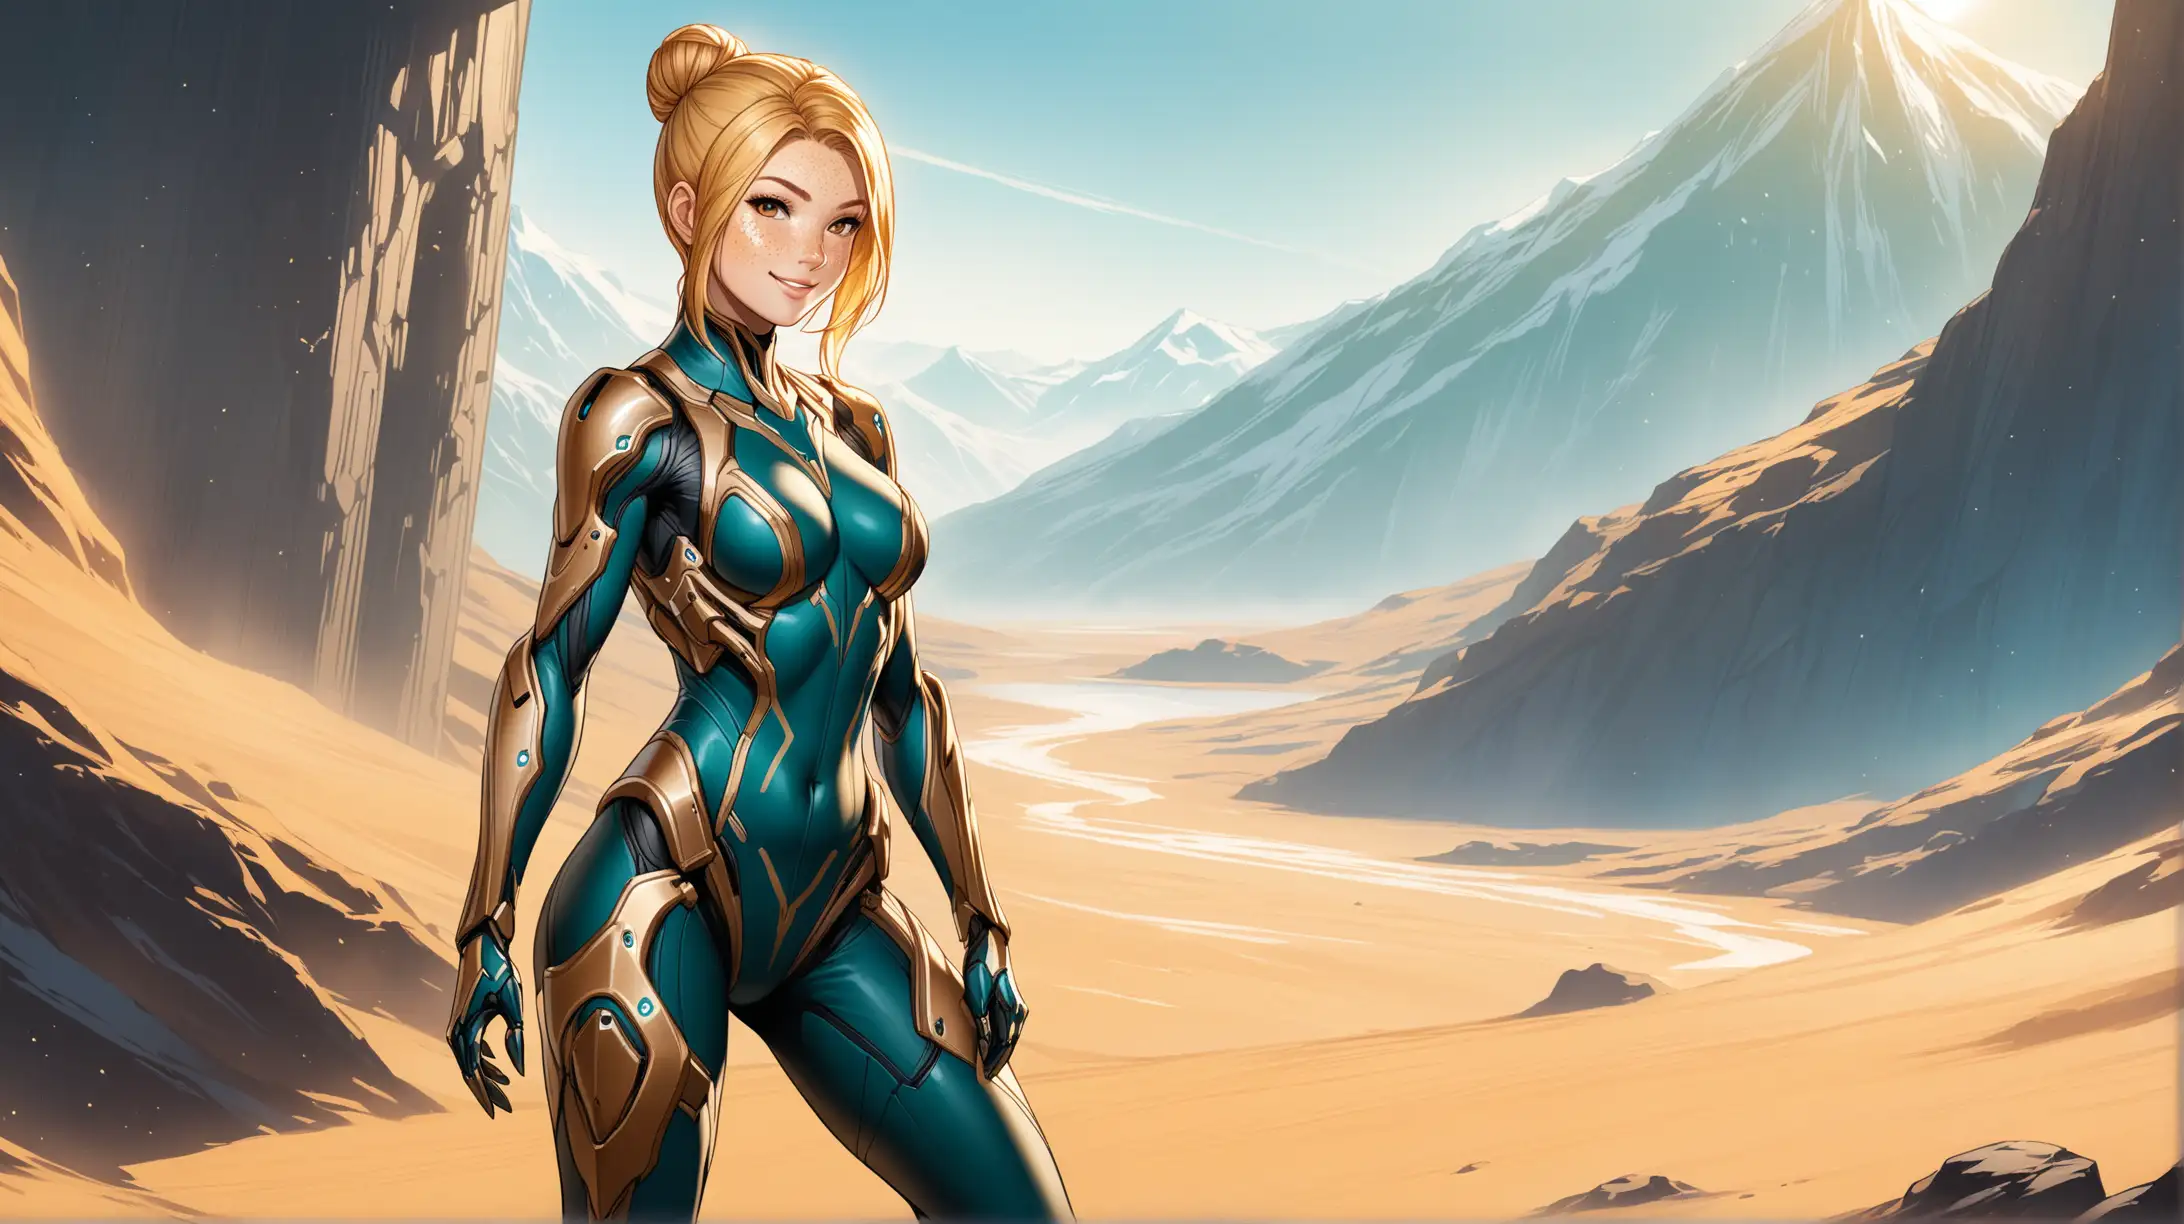 Draw a woman, long blonde hair in a bun, gold eyes, freckles, perky figure, bodysuit inspired from the game Warframe, high quality, long shot, outdoors, confident pose, natural lighting, smiling at the viewer